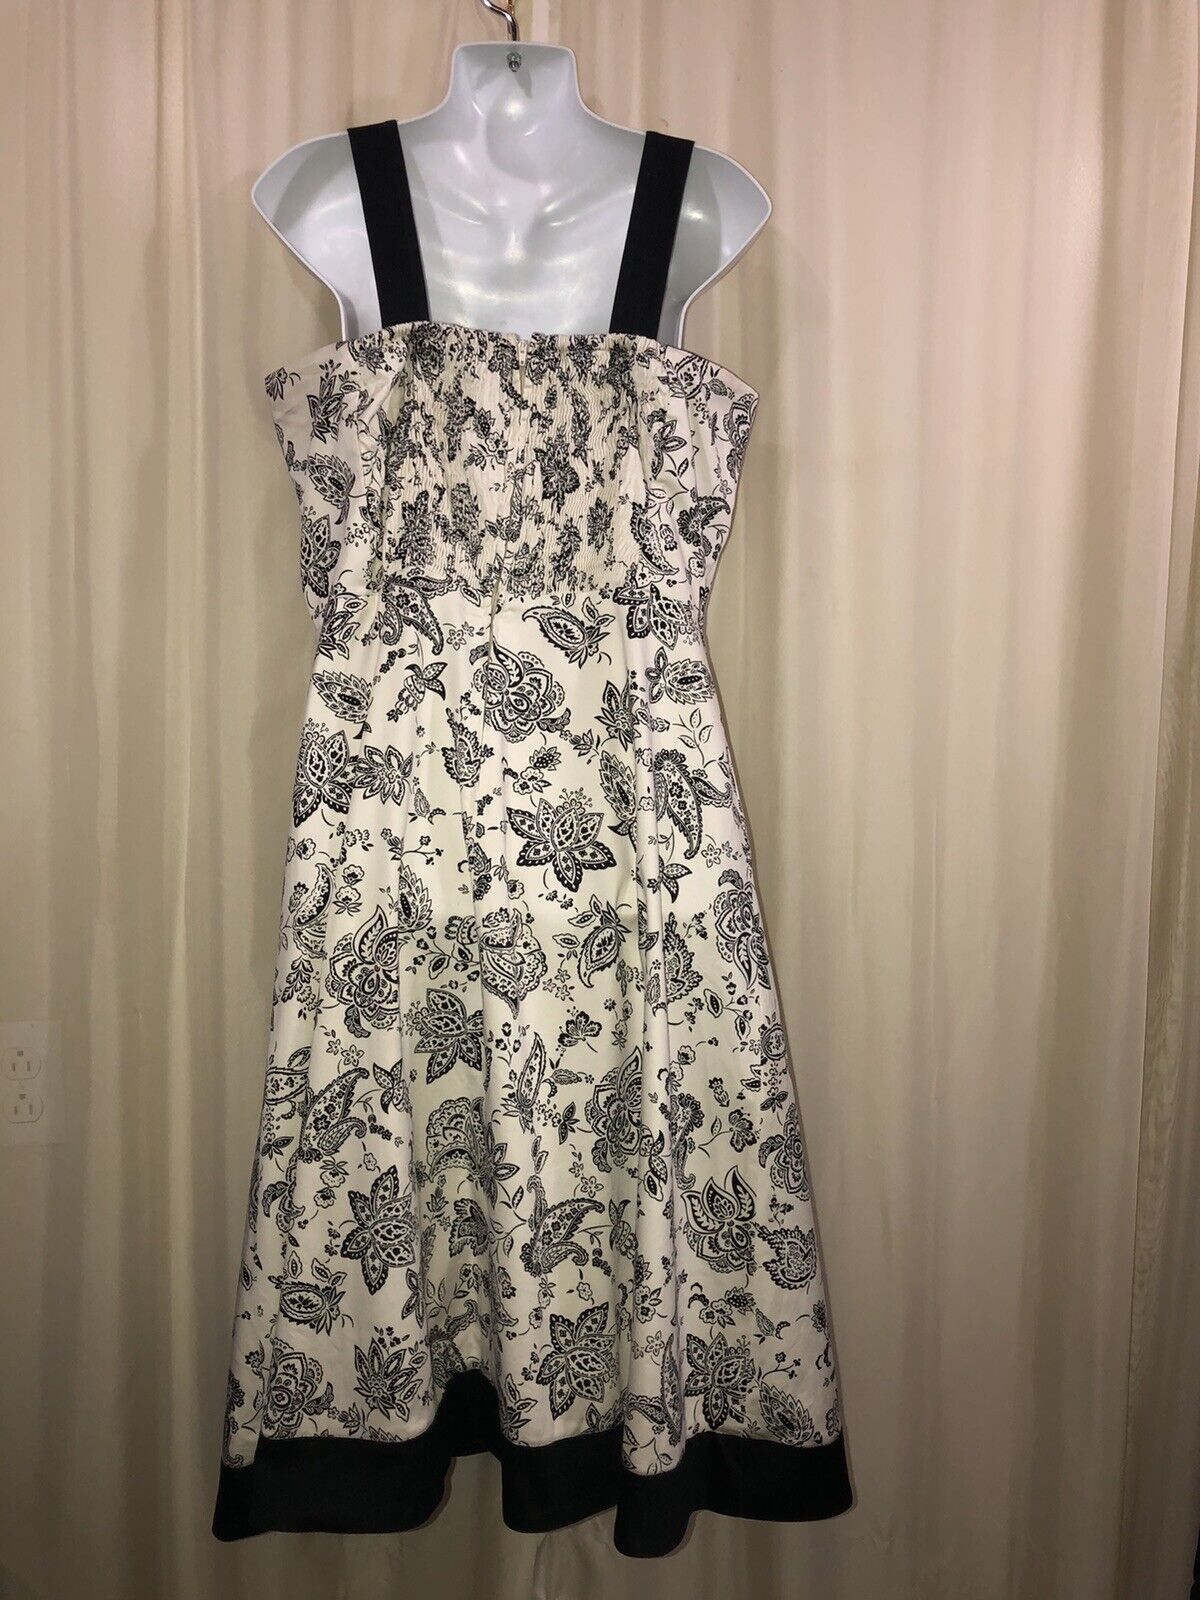 MADISON LEIGH Summer Dress Size 10 Black & White Floral